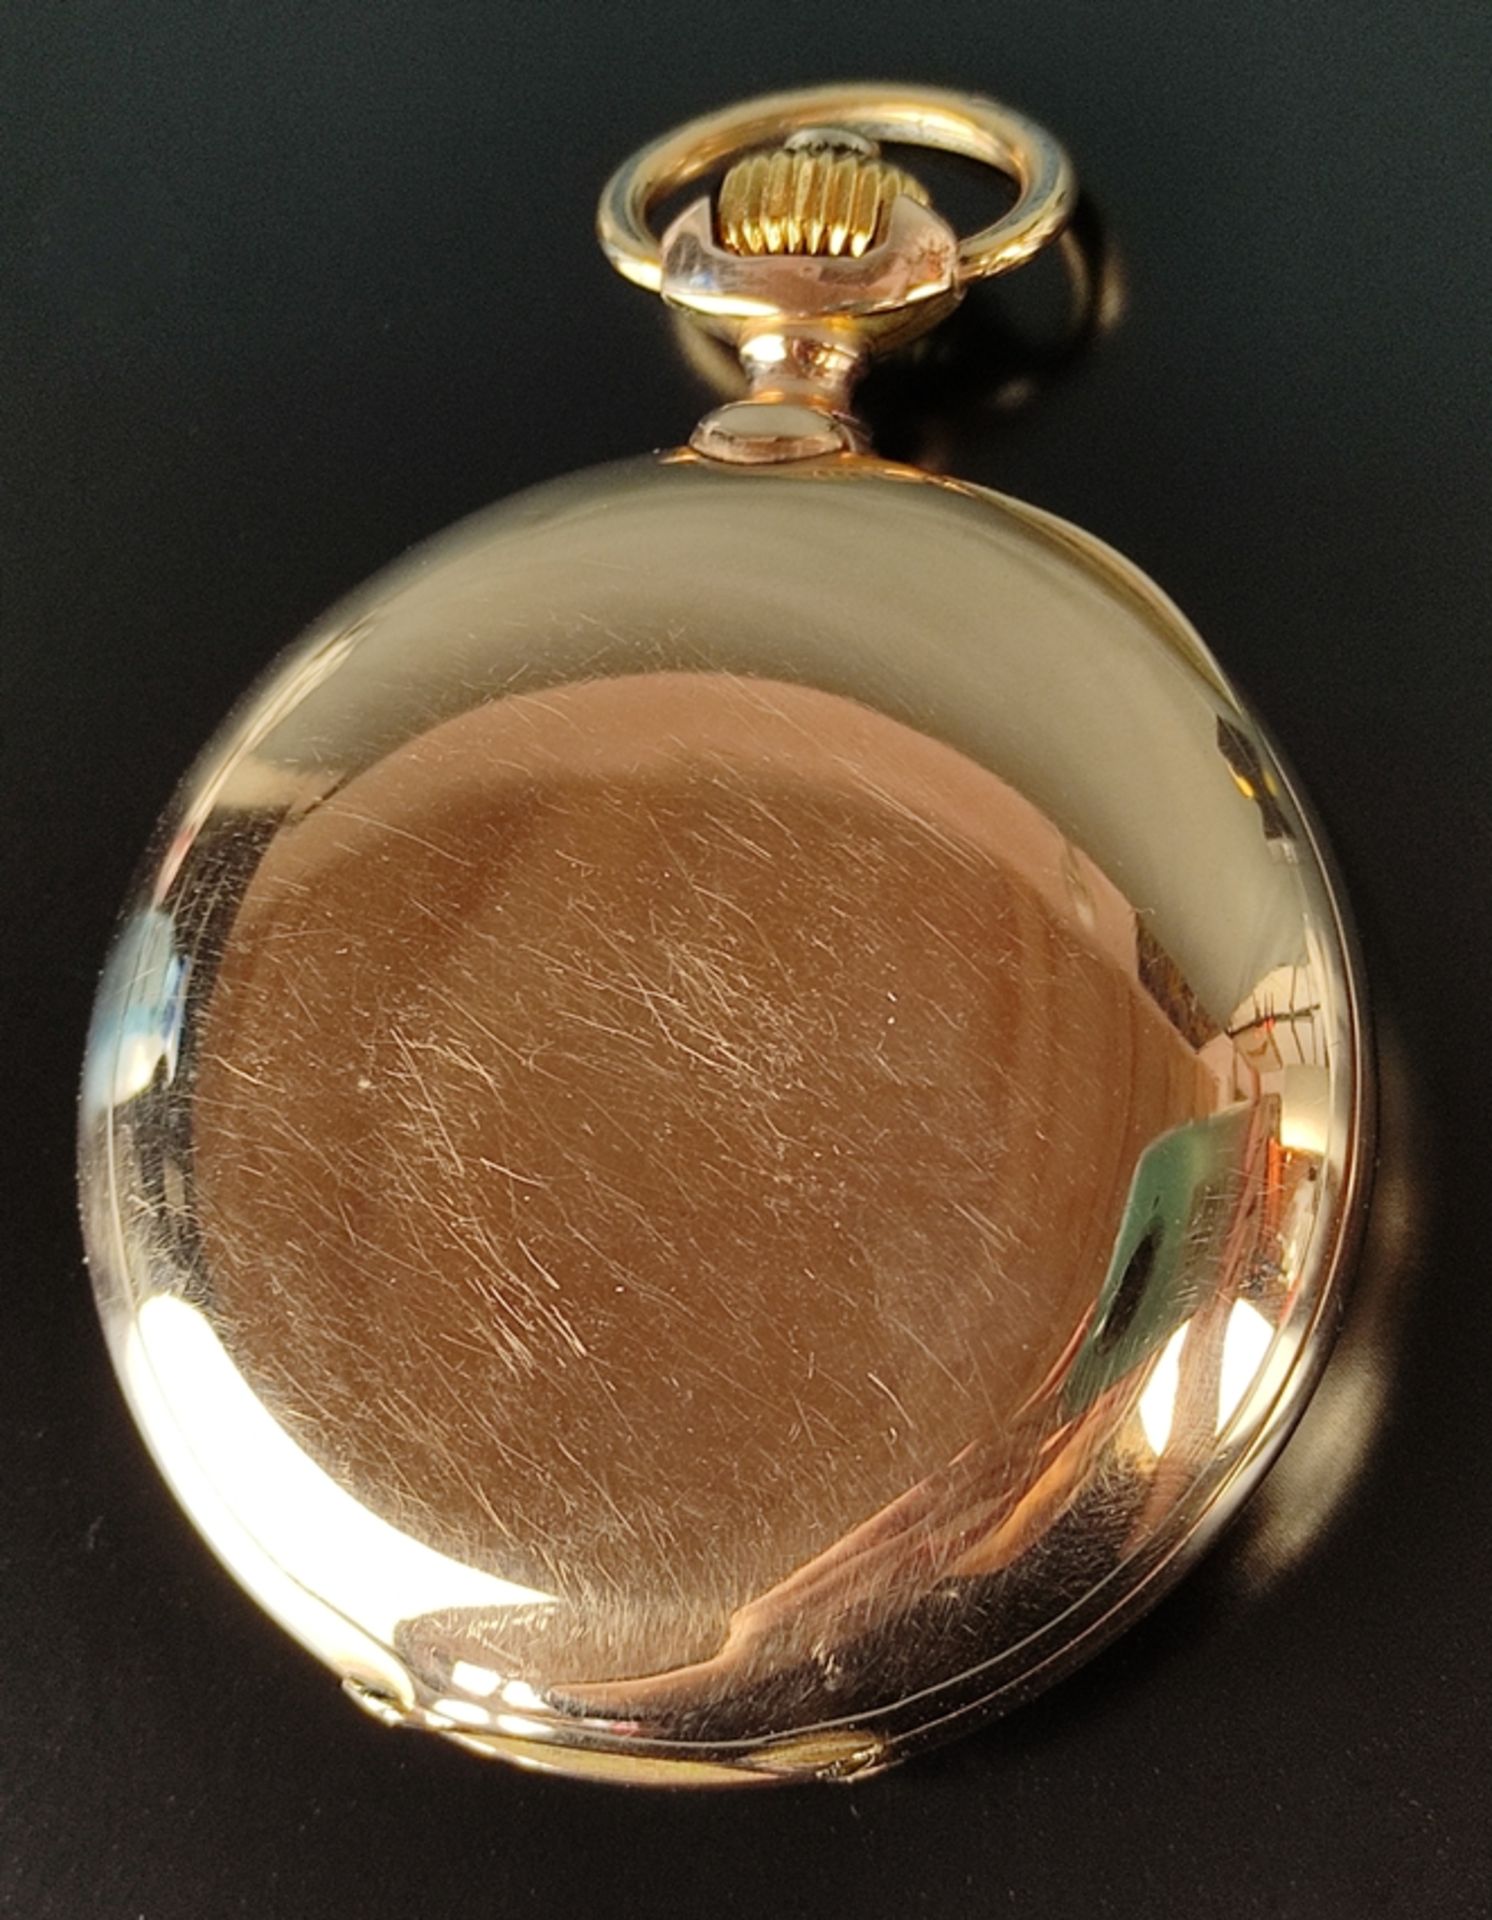 Savonette, pocket watch, spring cap, Systeme Glashütte, round dial with Arabic numerals, small seco - Image 7 of 7